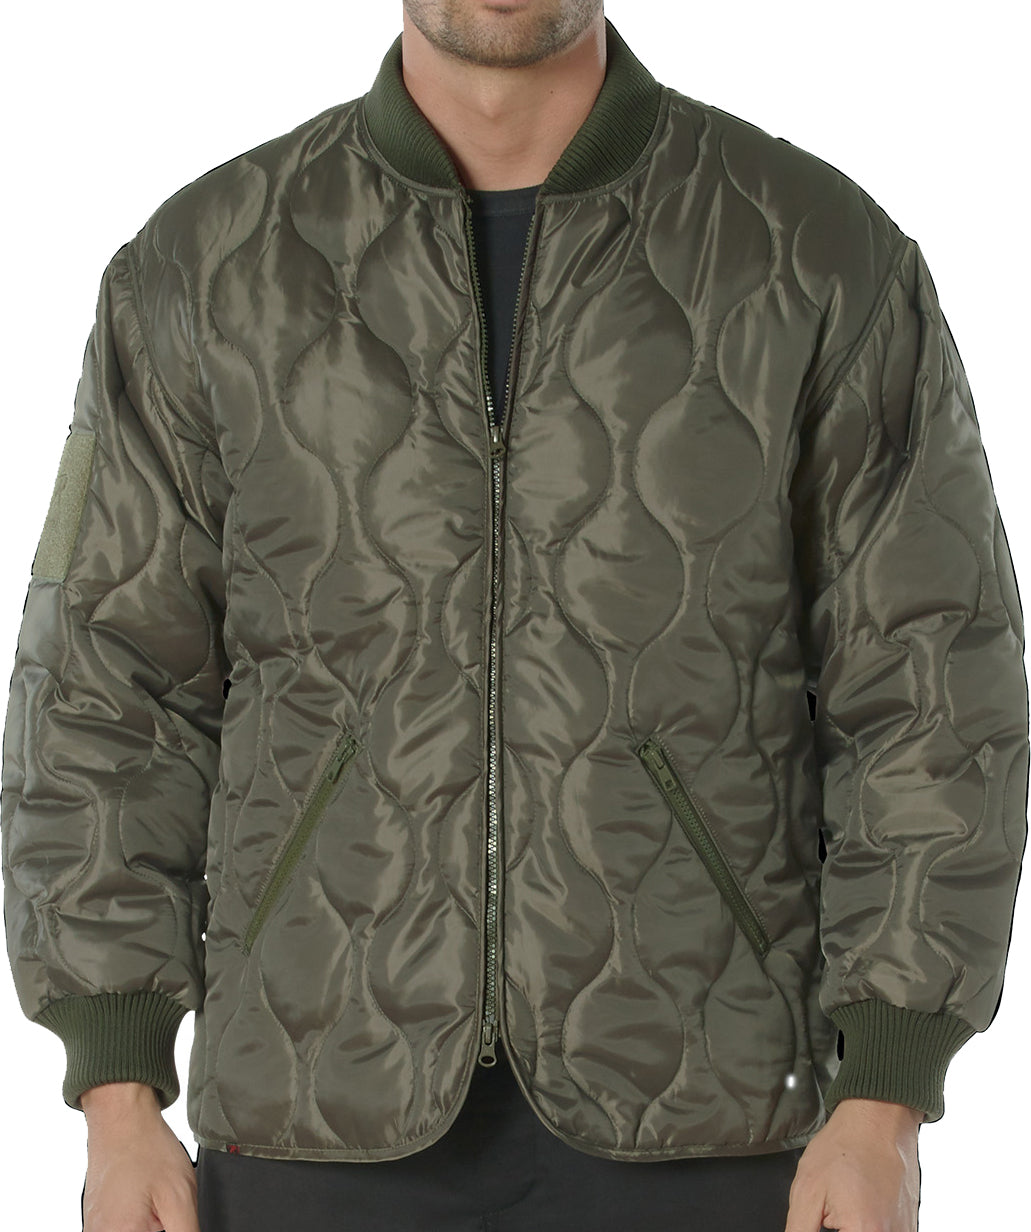 Olive Drab - Concealed Carry Quilted Woobie Jacket - Galaxy Army Navy